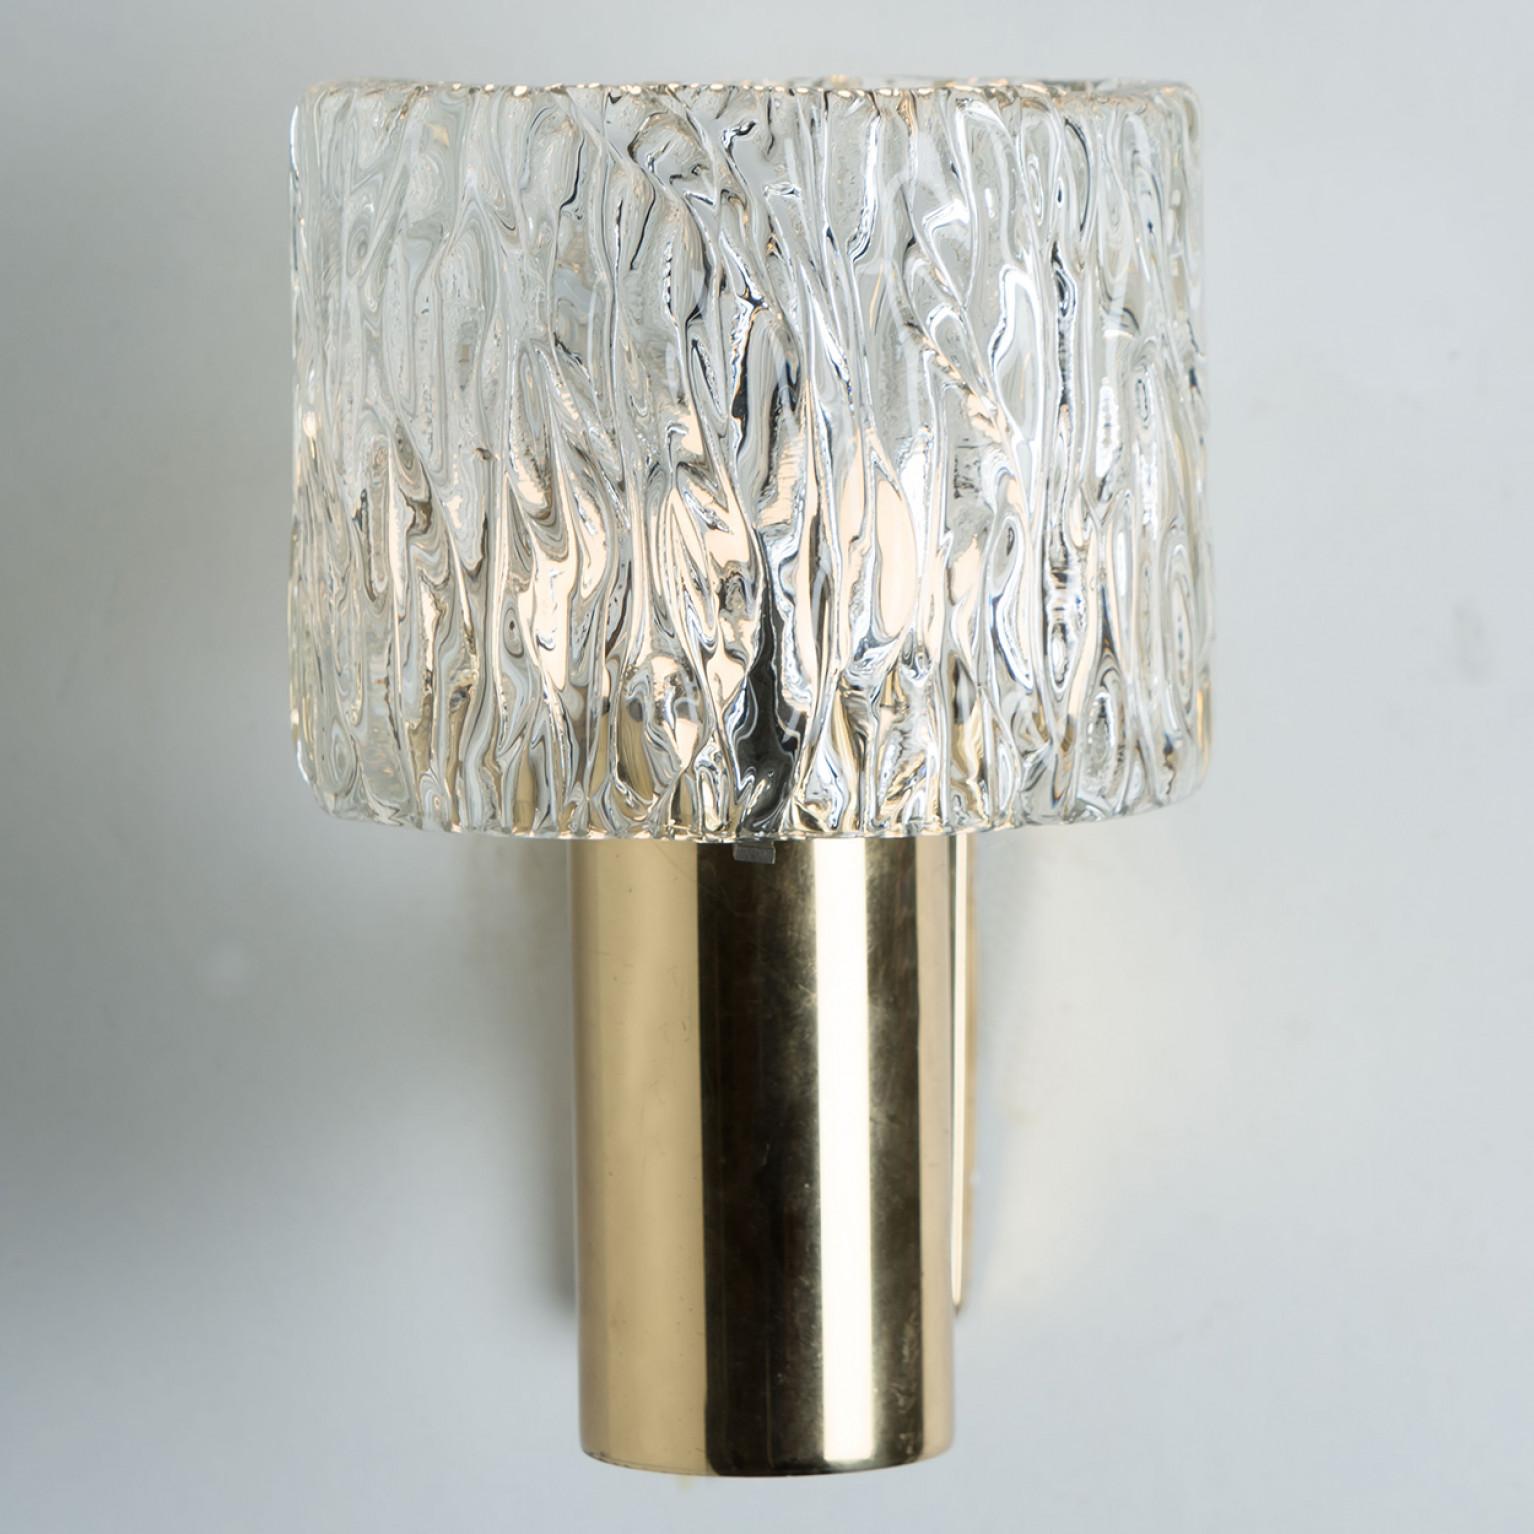 Brass 1 of the 2 Pairs of Glass Torch Wall Sconces by Fagerlund, 1960 For Sale